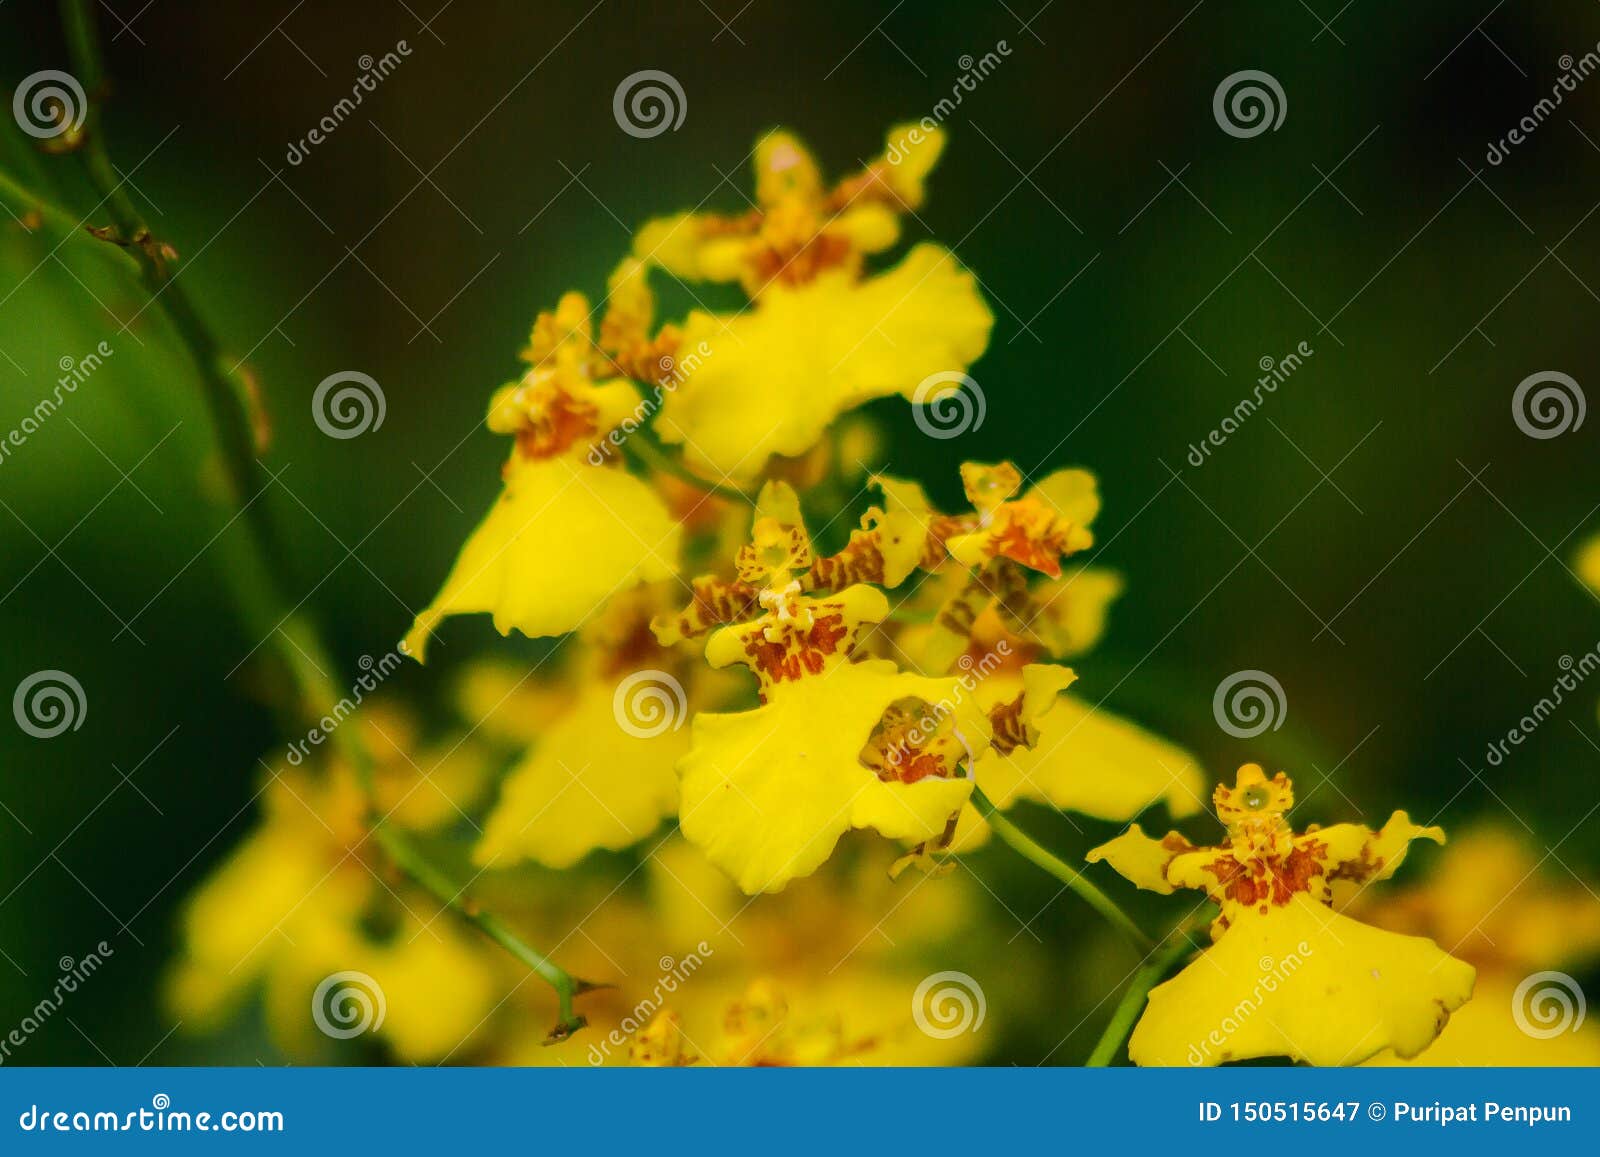 oncidium orchids are cultivars that are easy